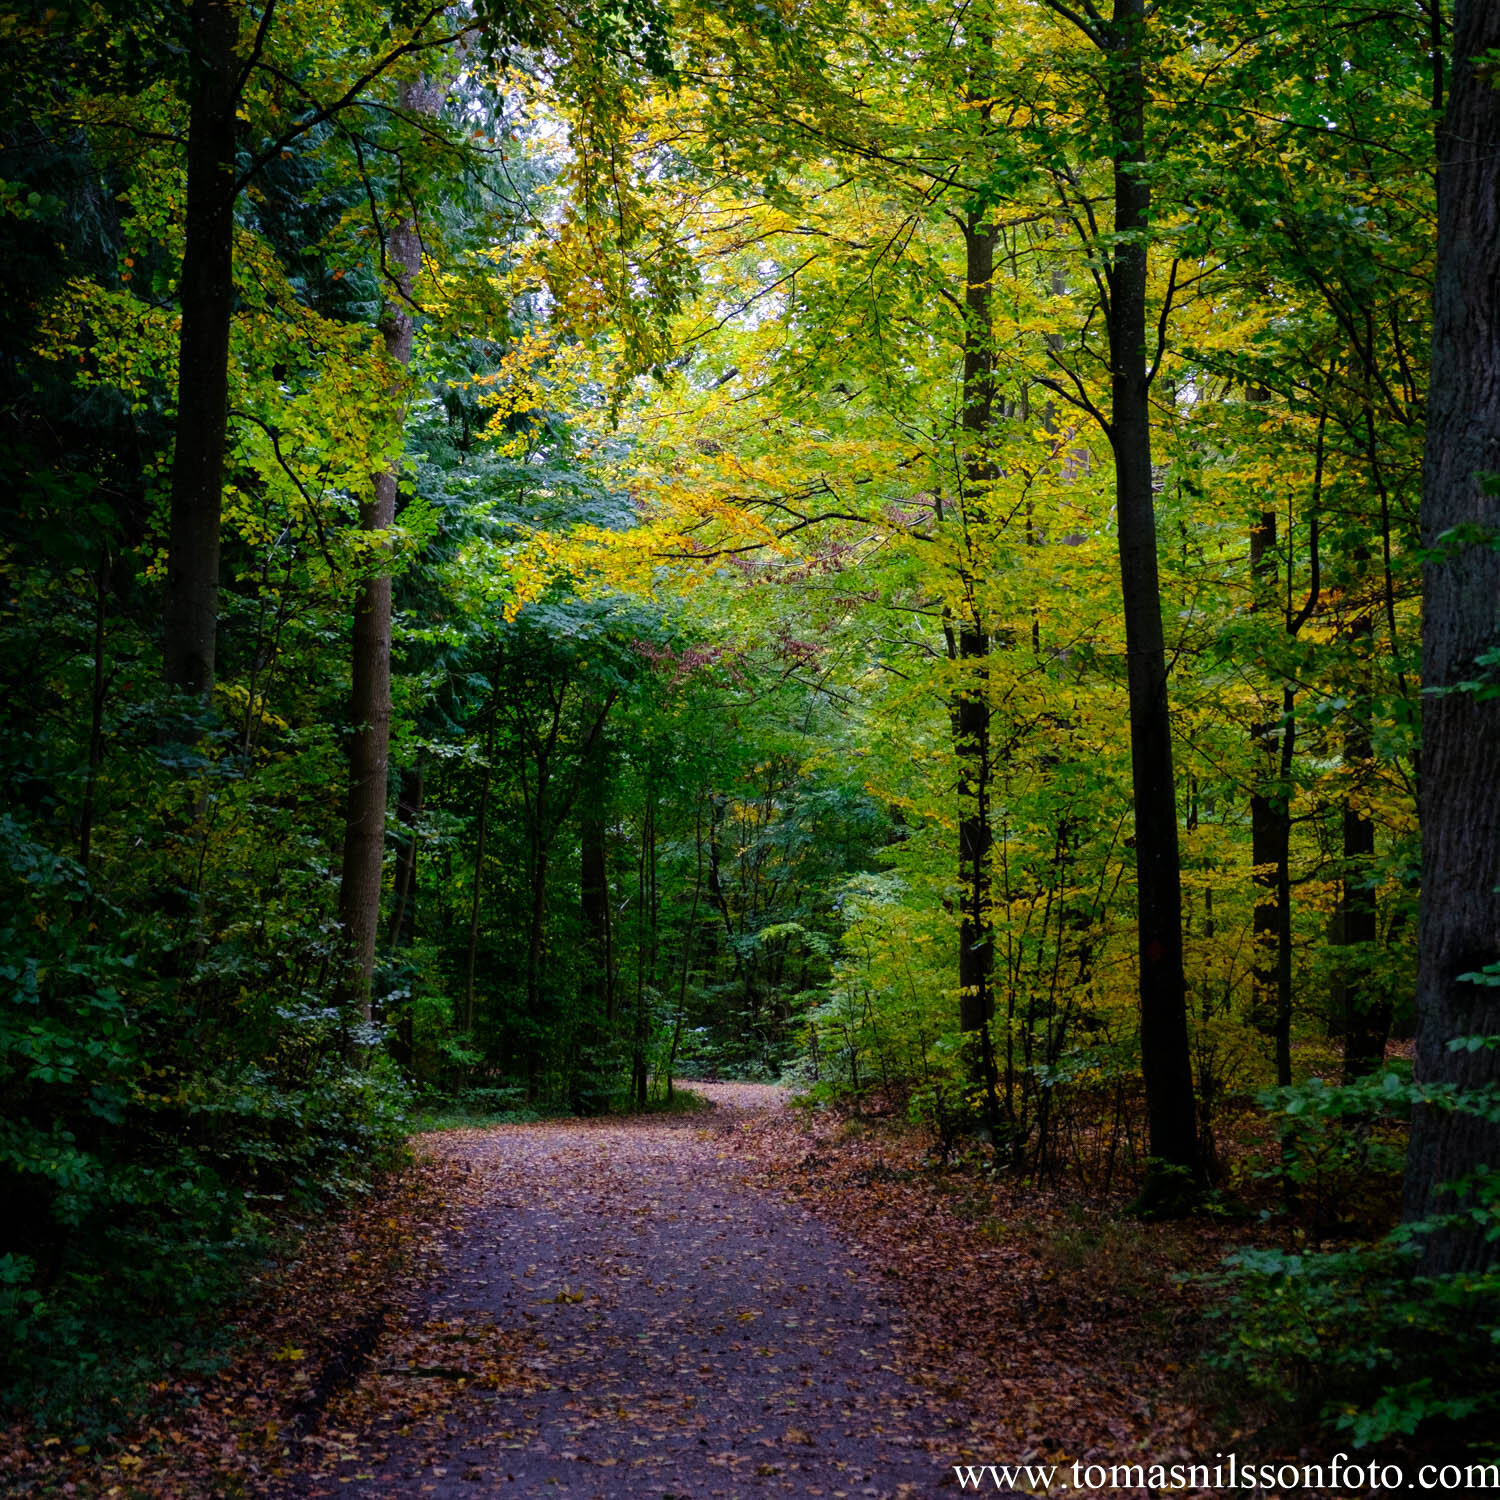 Day 301 - October 27: Forest Tunnel